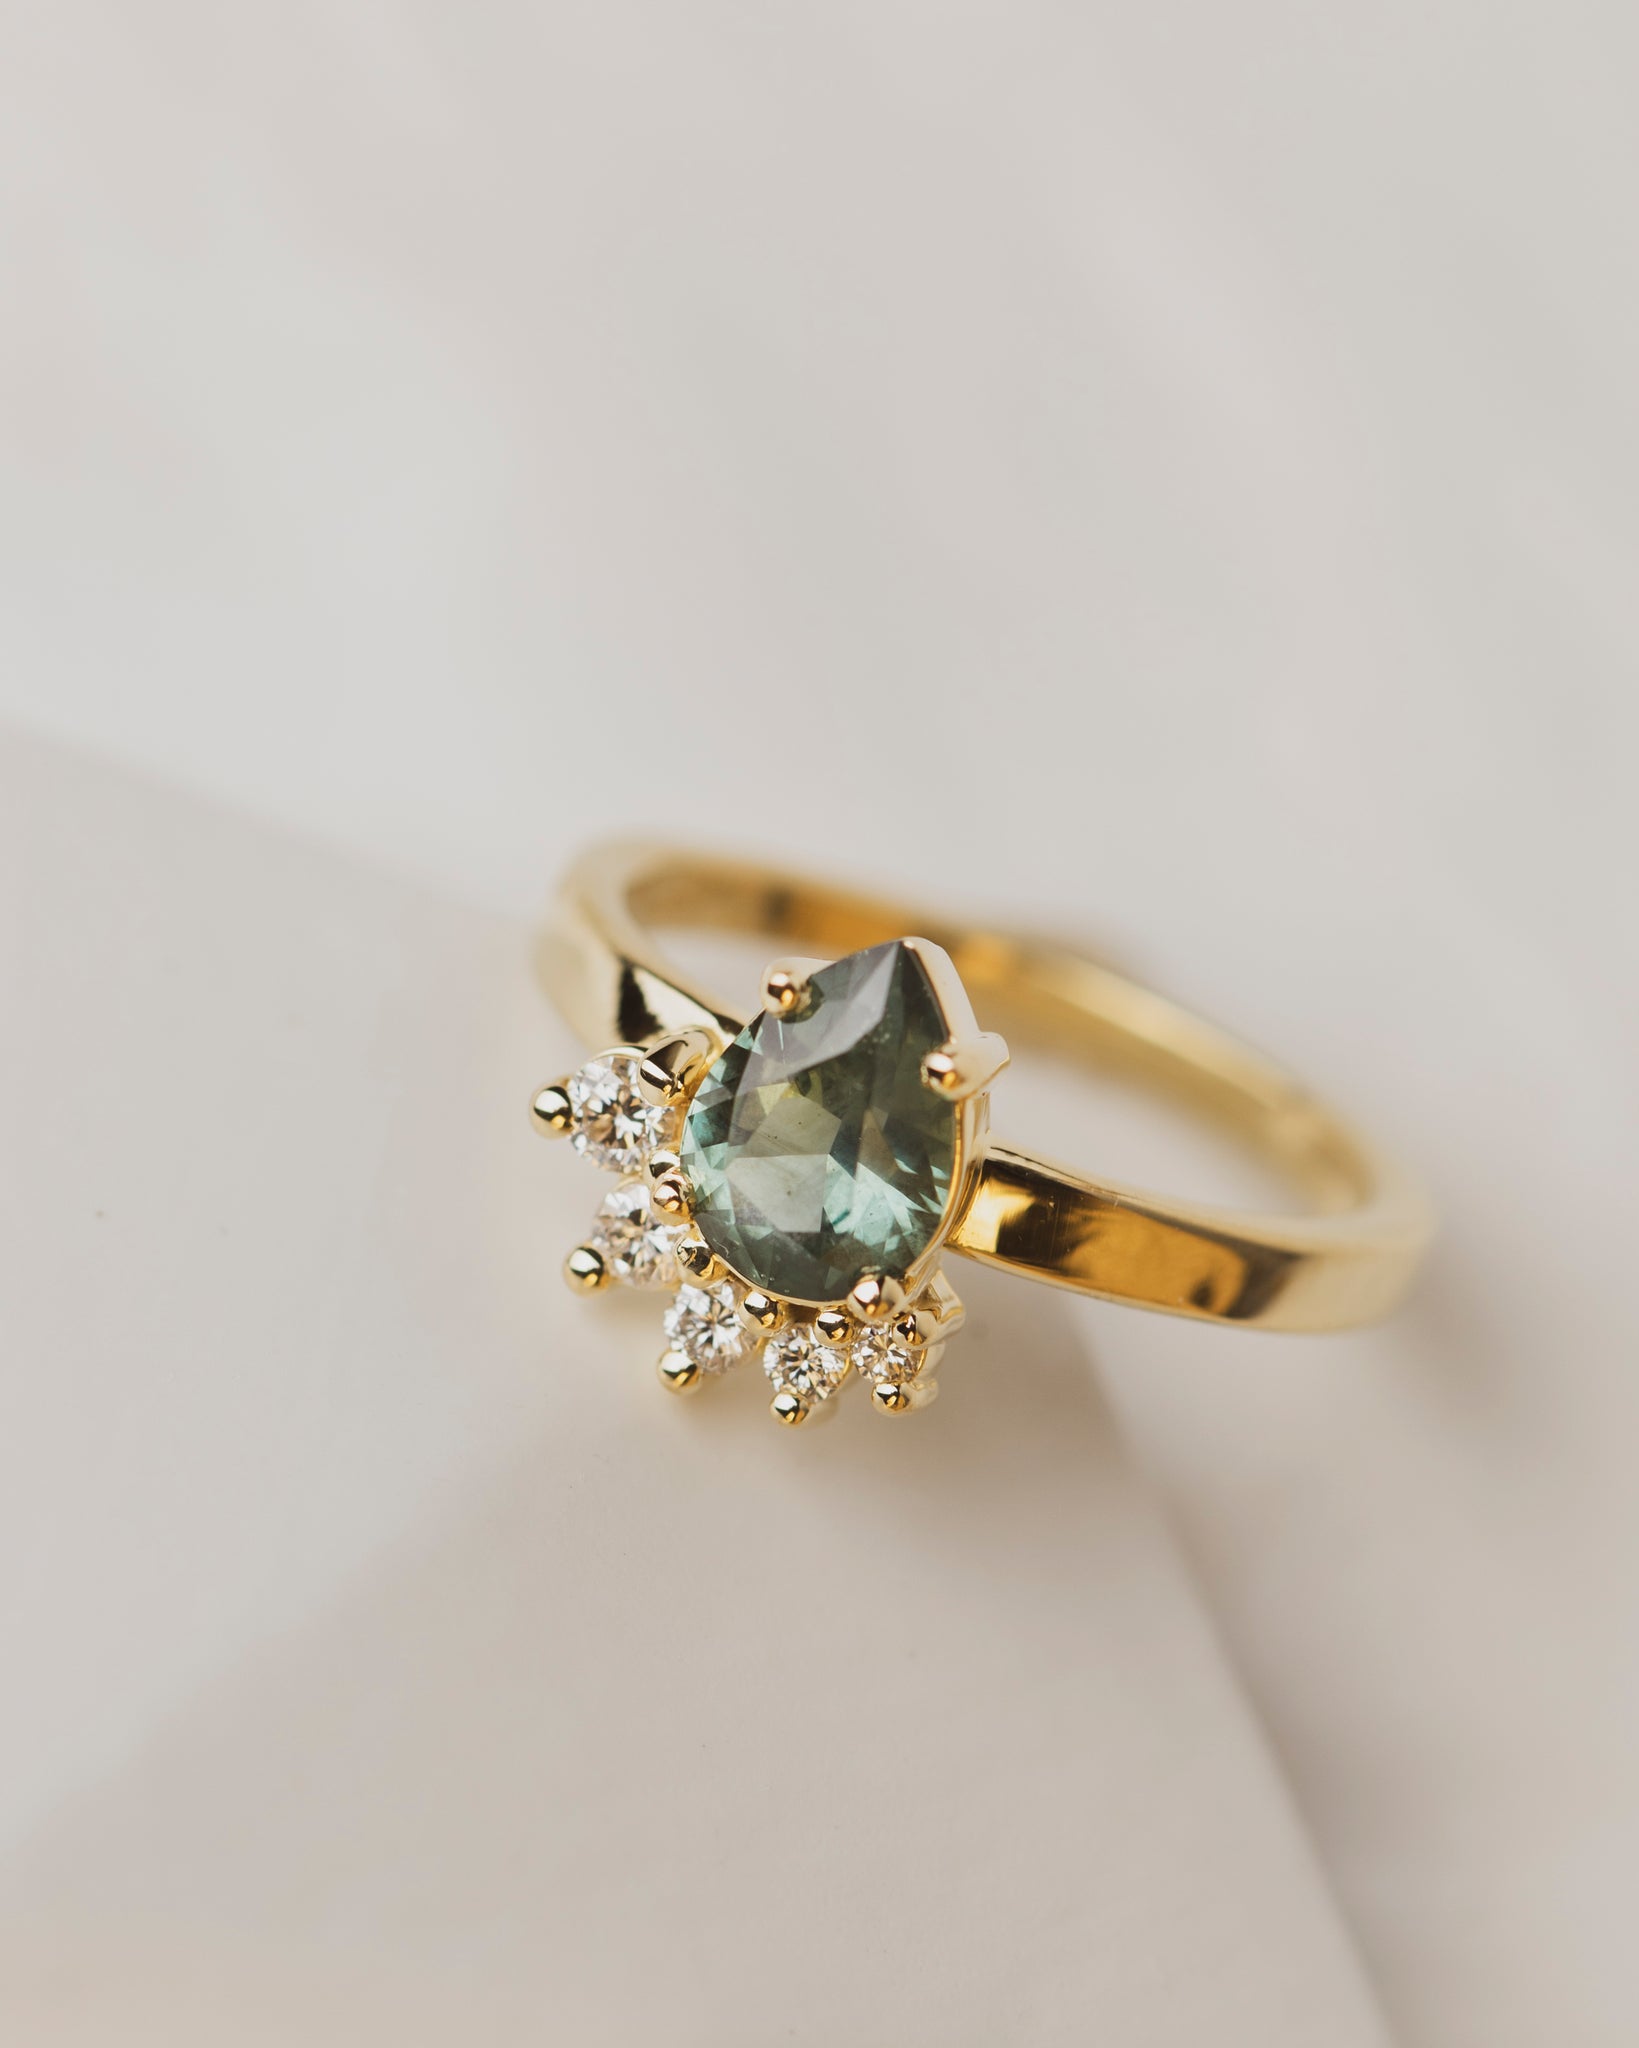 Our signature Pear Wave style engagement ring boasts a 1.2 carat green sapphire from Australia with a wave of five white diamonds set in 18K yellow gold